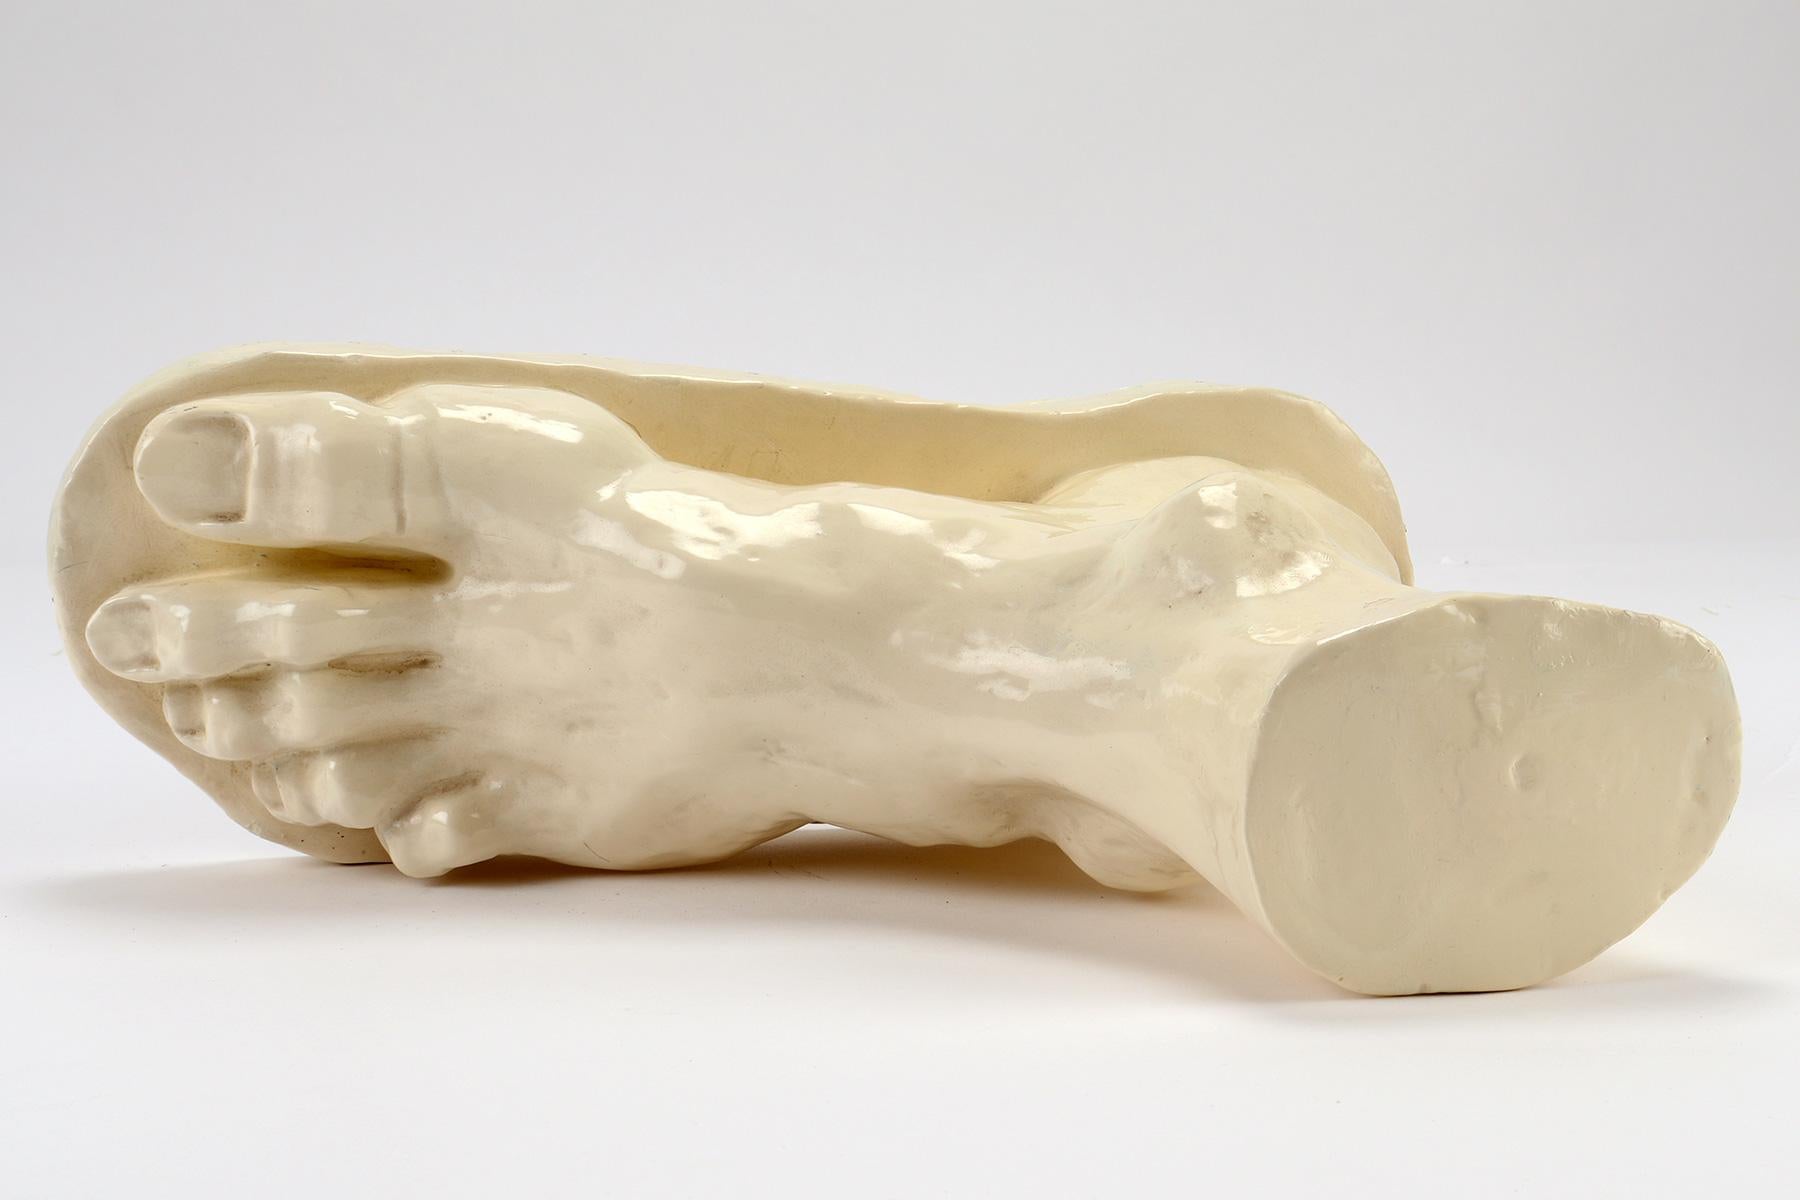 Glazed Clay Sculpture Depicting a Foot, Italy, 1900 For Sale 7